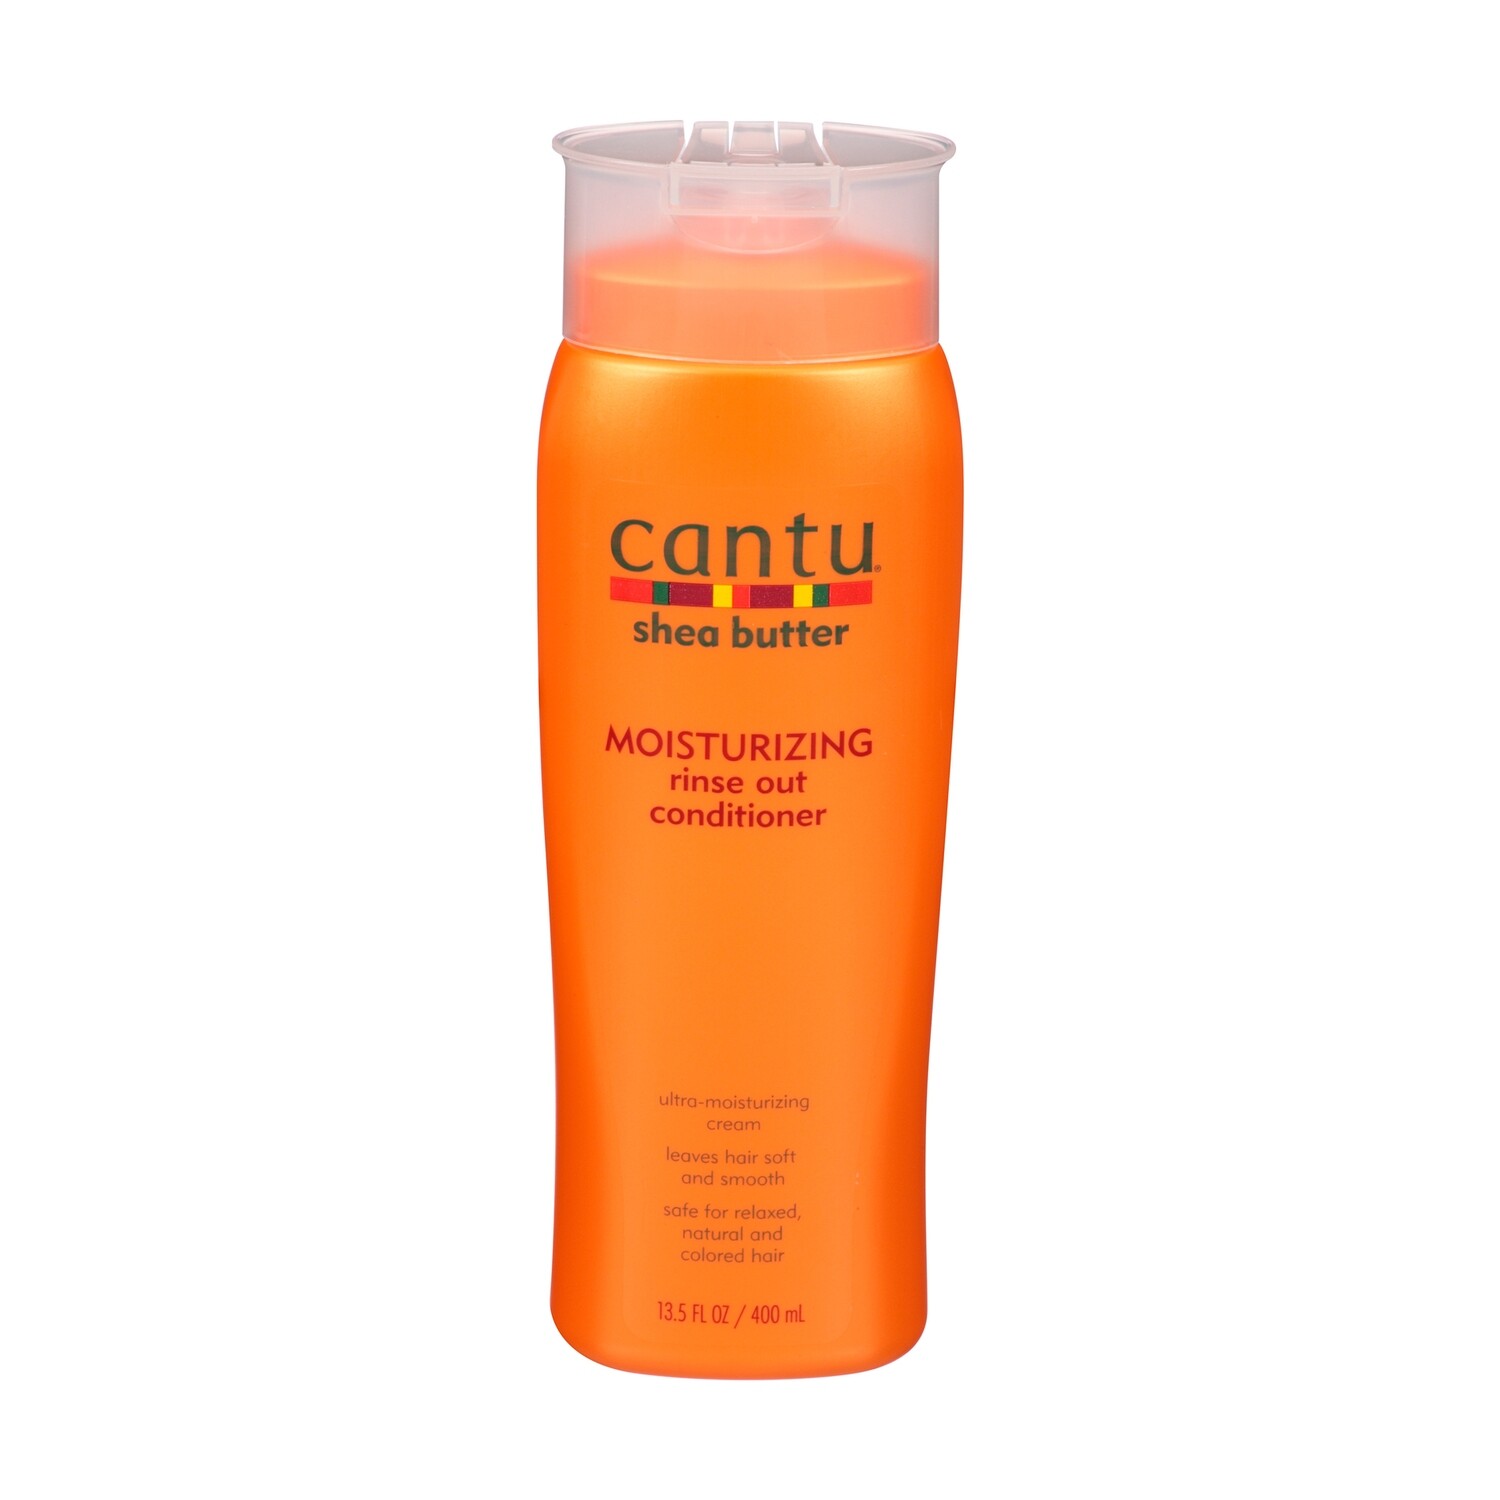 Cantu Shea Butter Moisturizing Rinse out Conditioner (400ml)